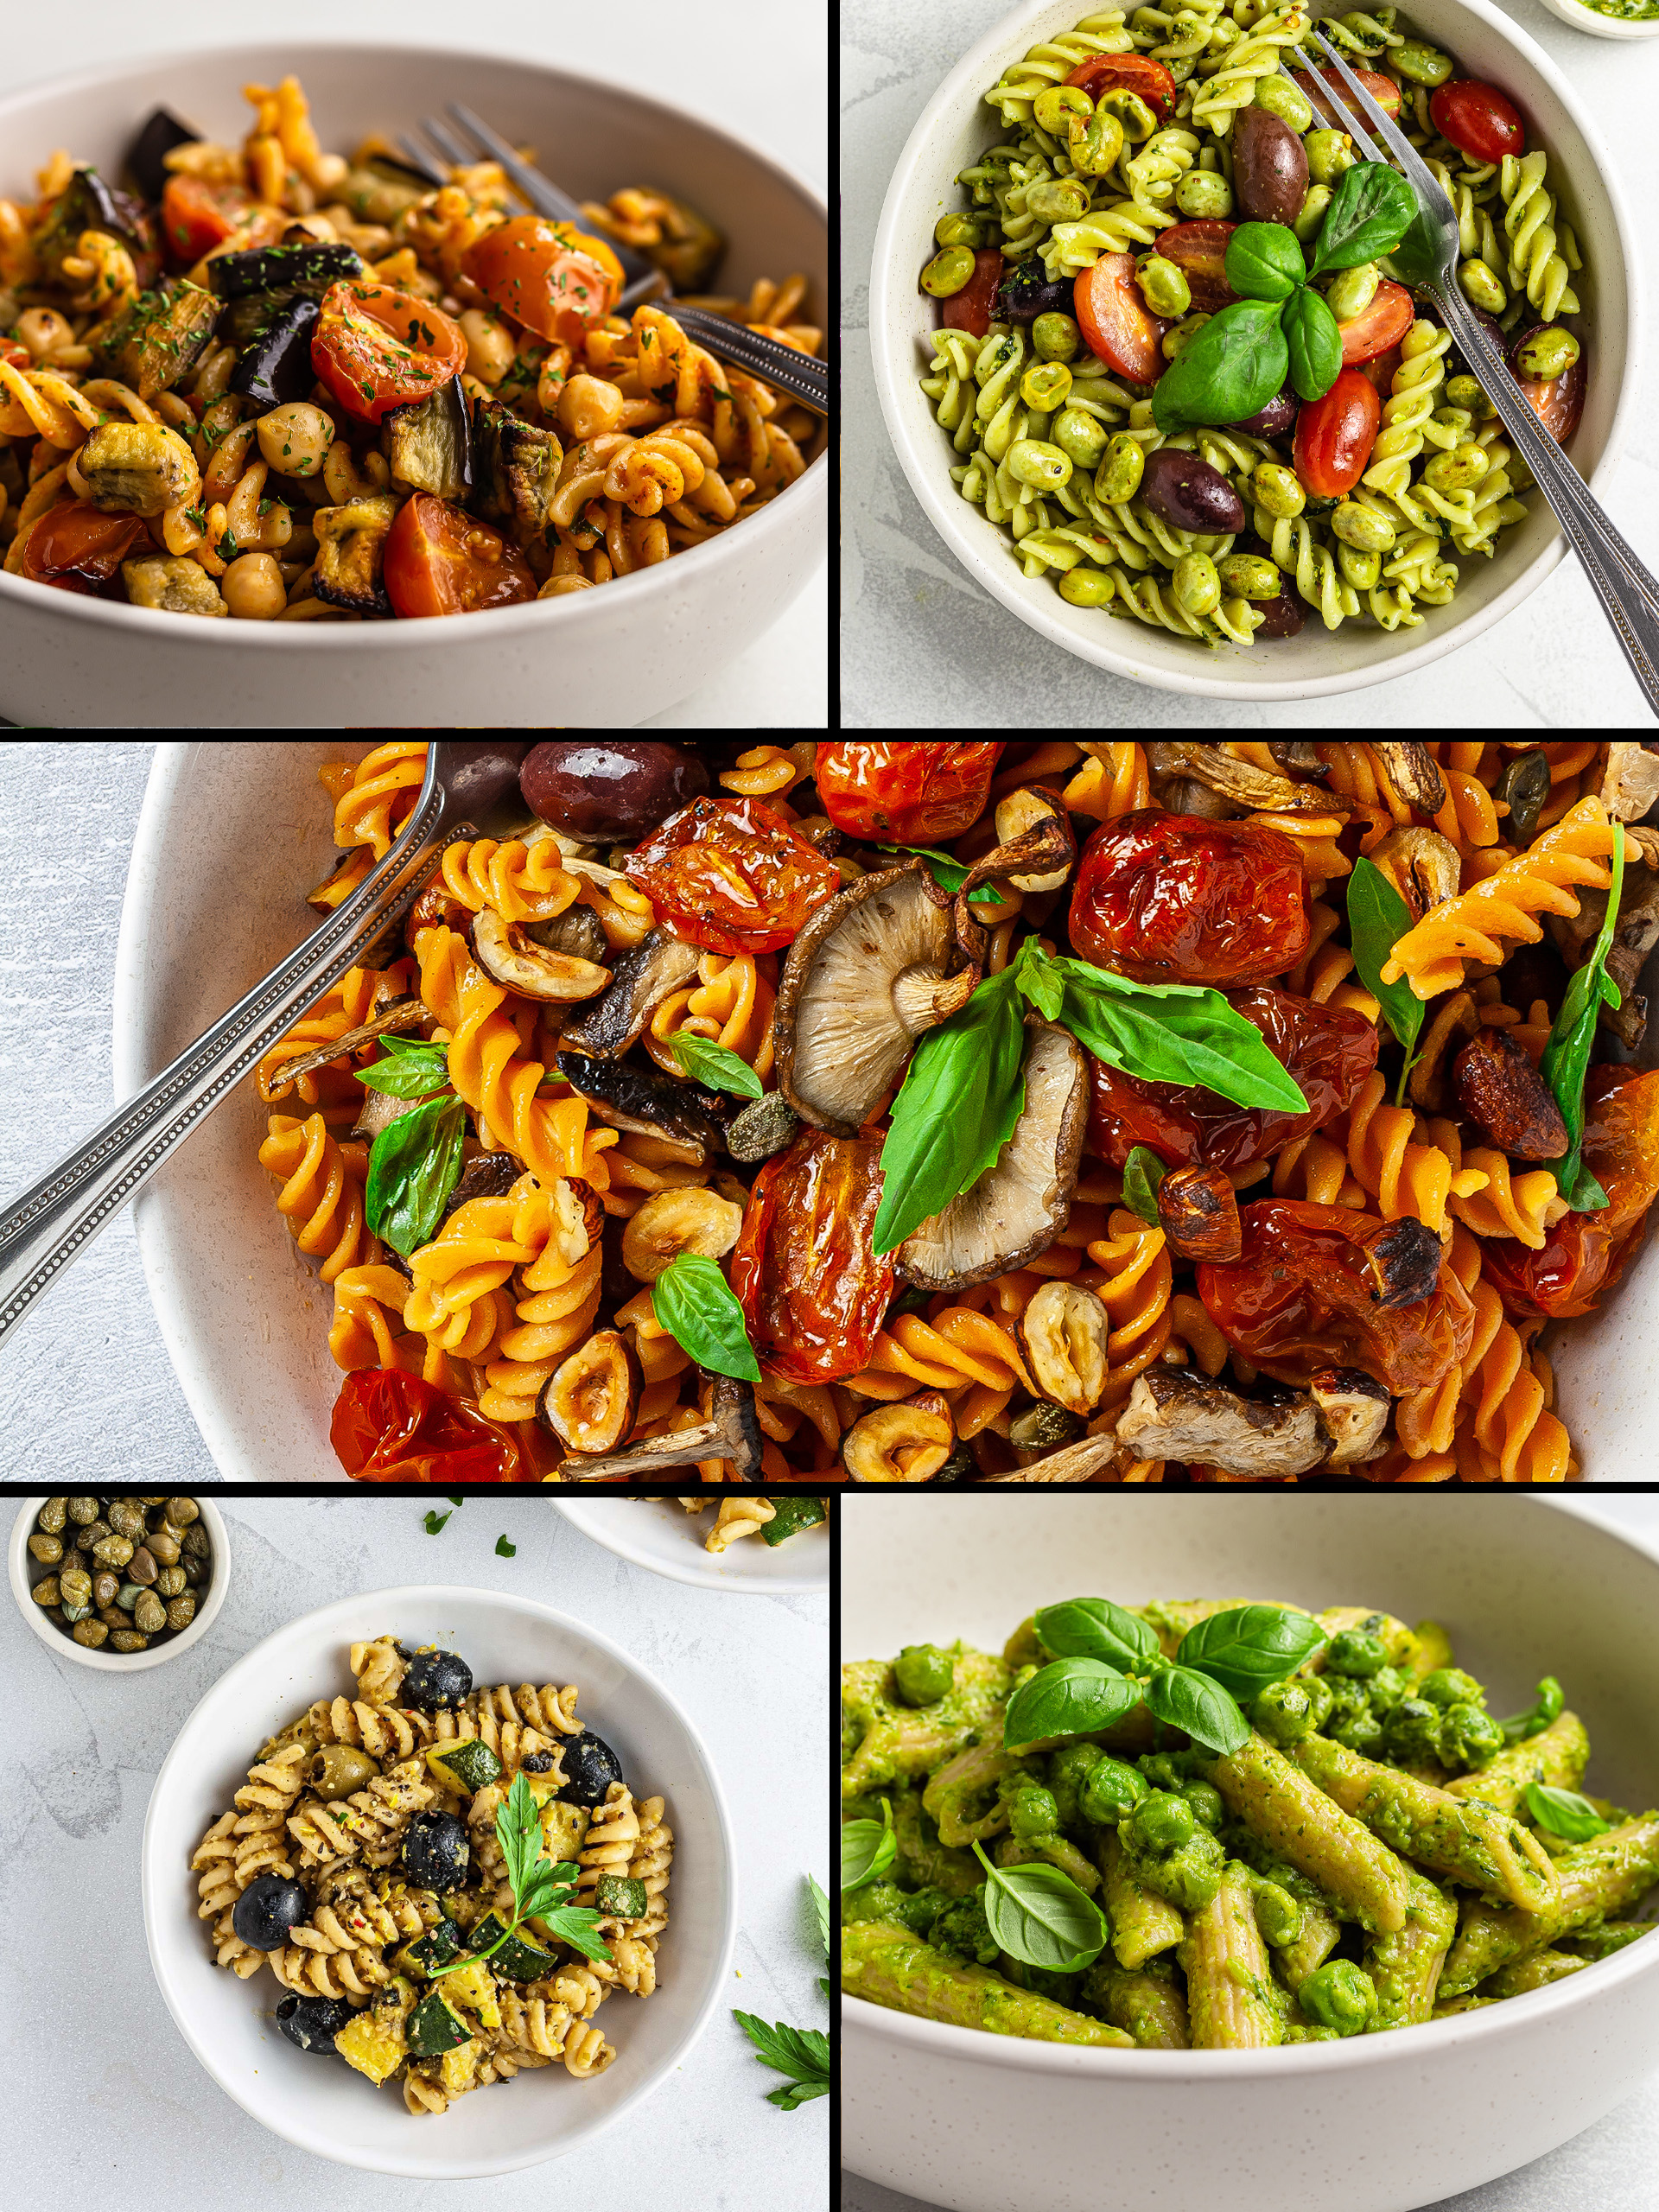 7 Healthy Vegan Pasta Recipes for Your Lunch-Box